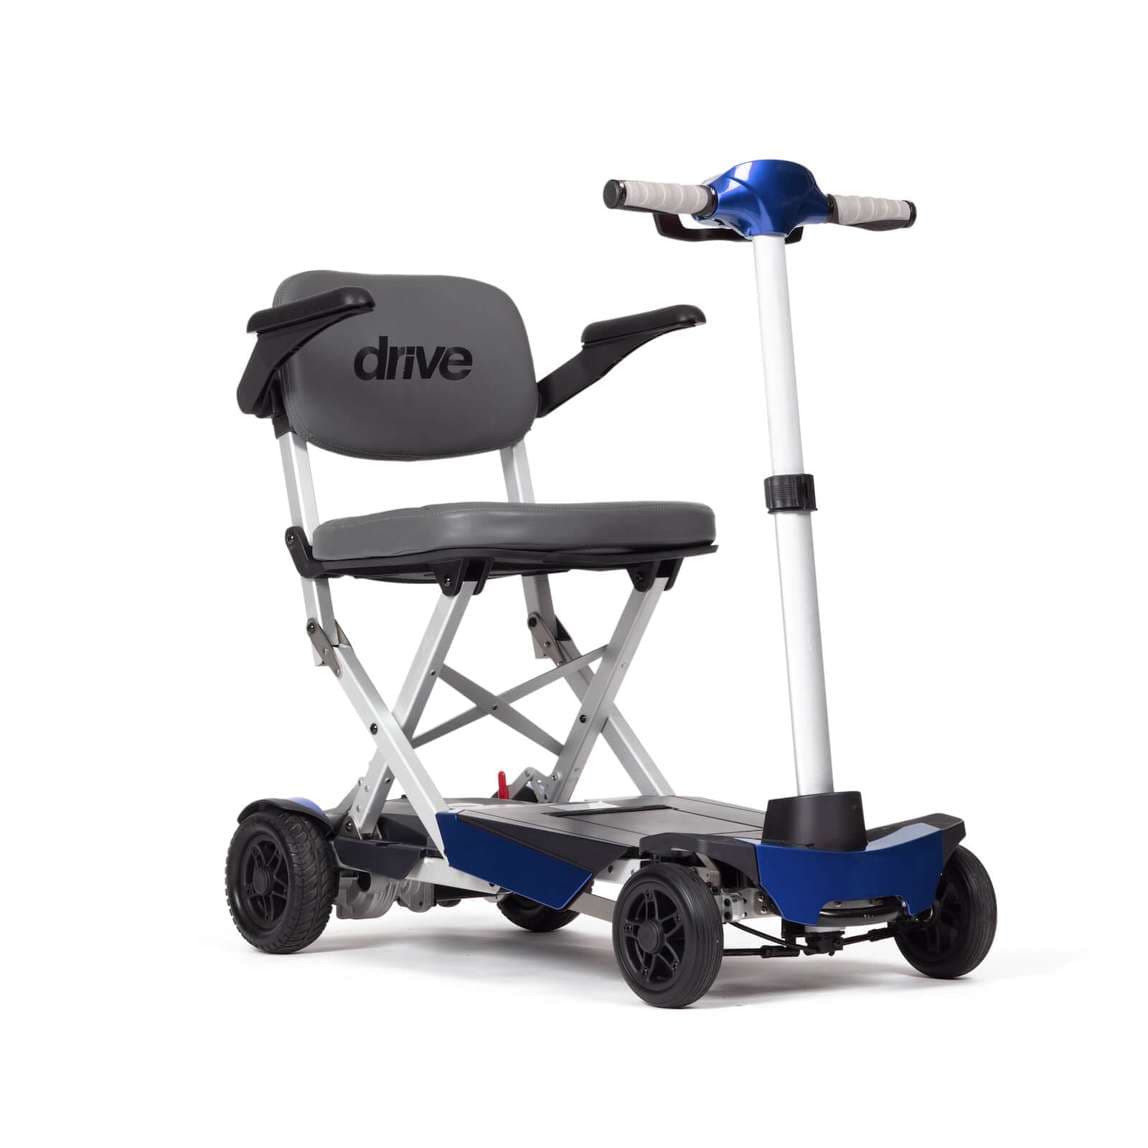 Drive Folding Scooter